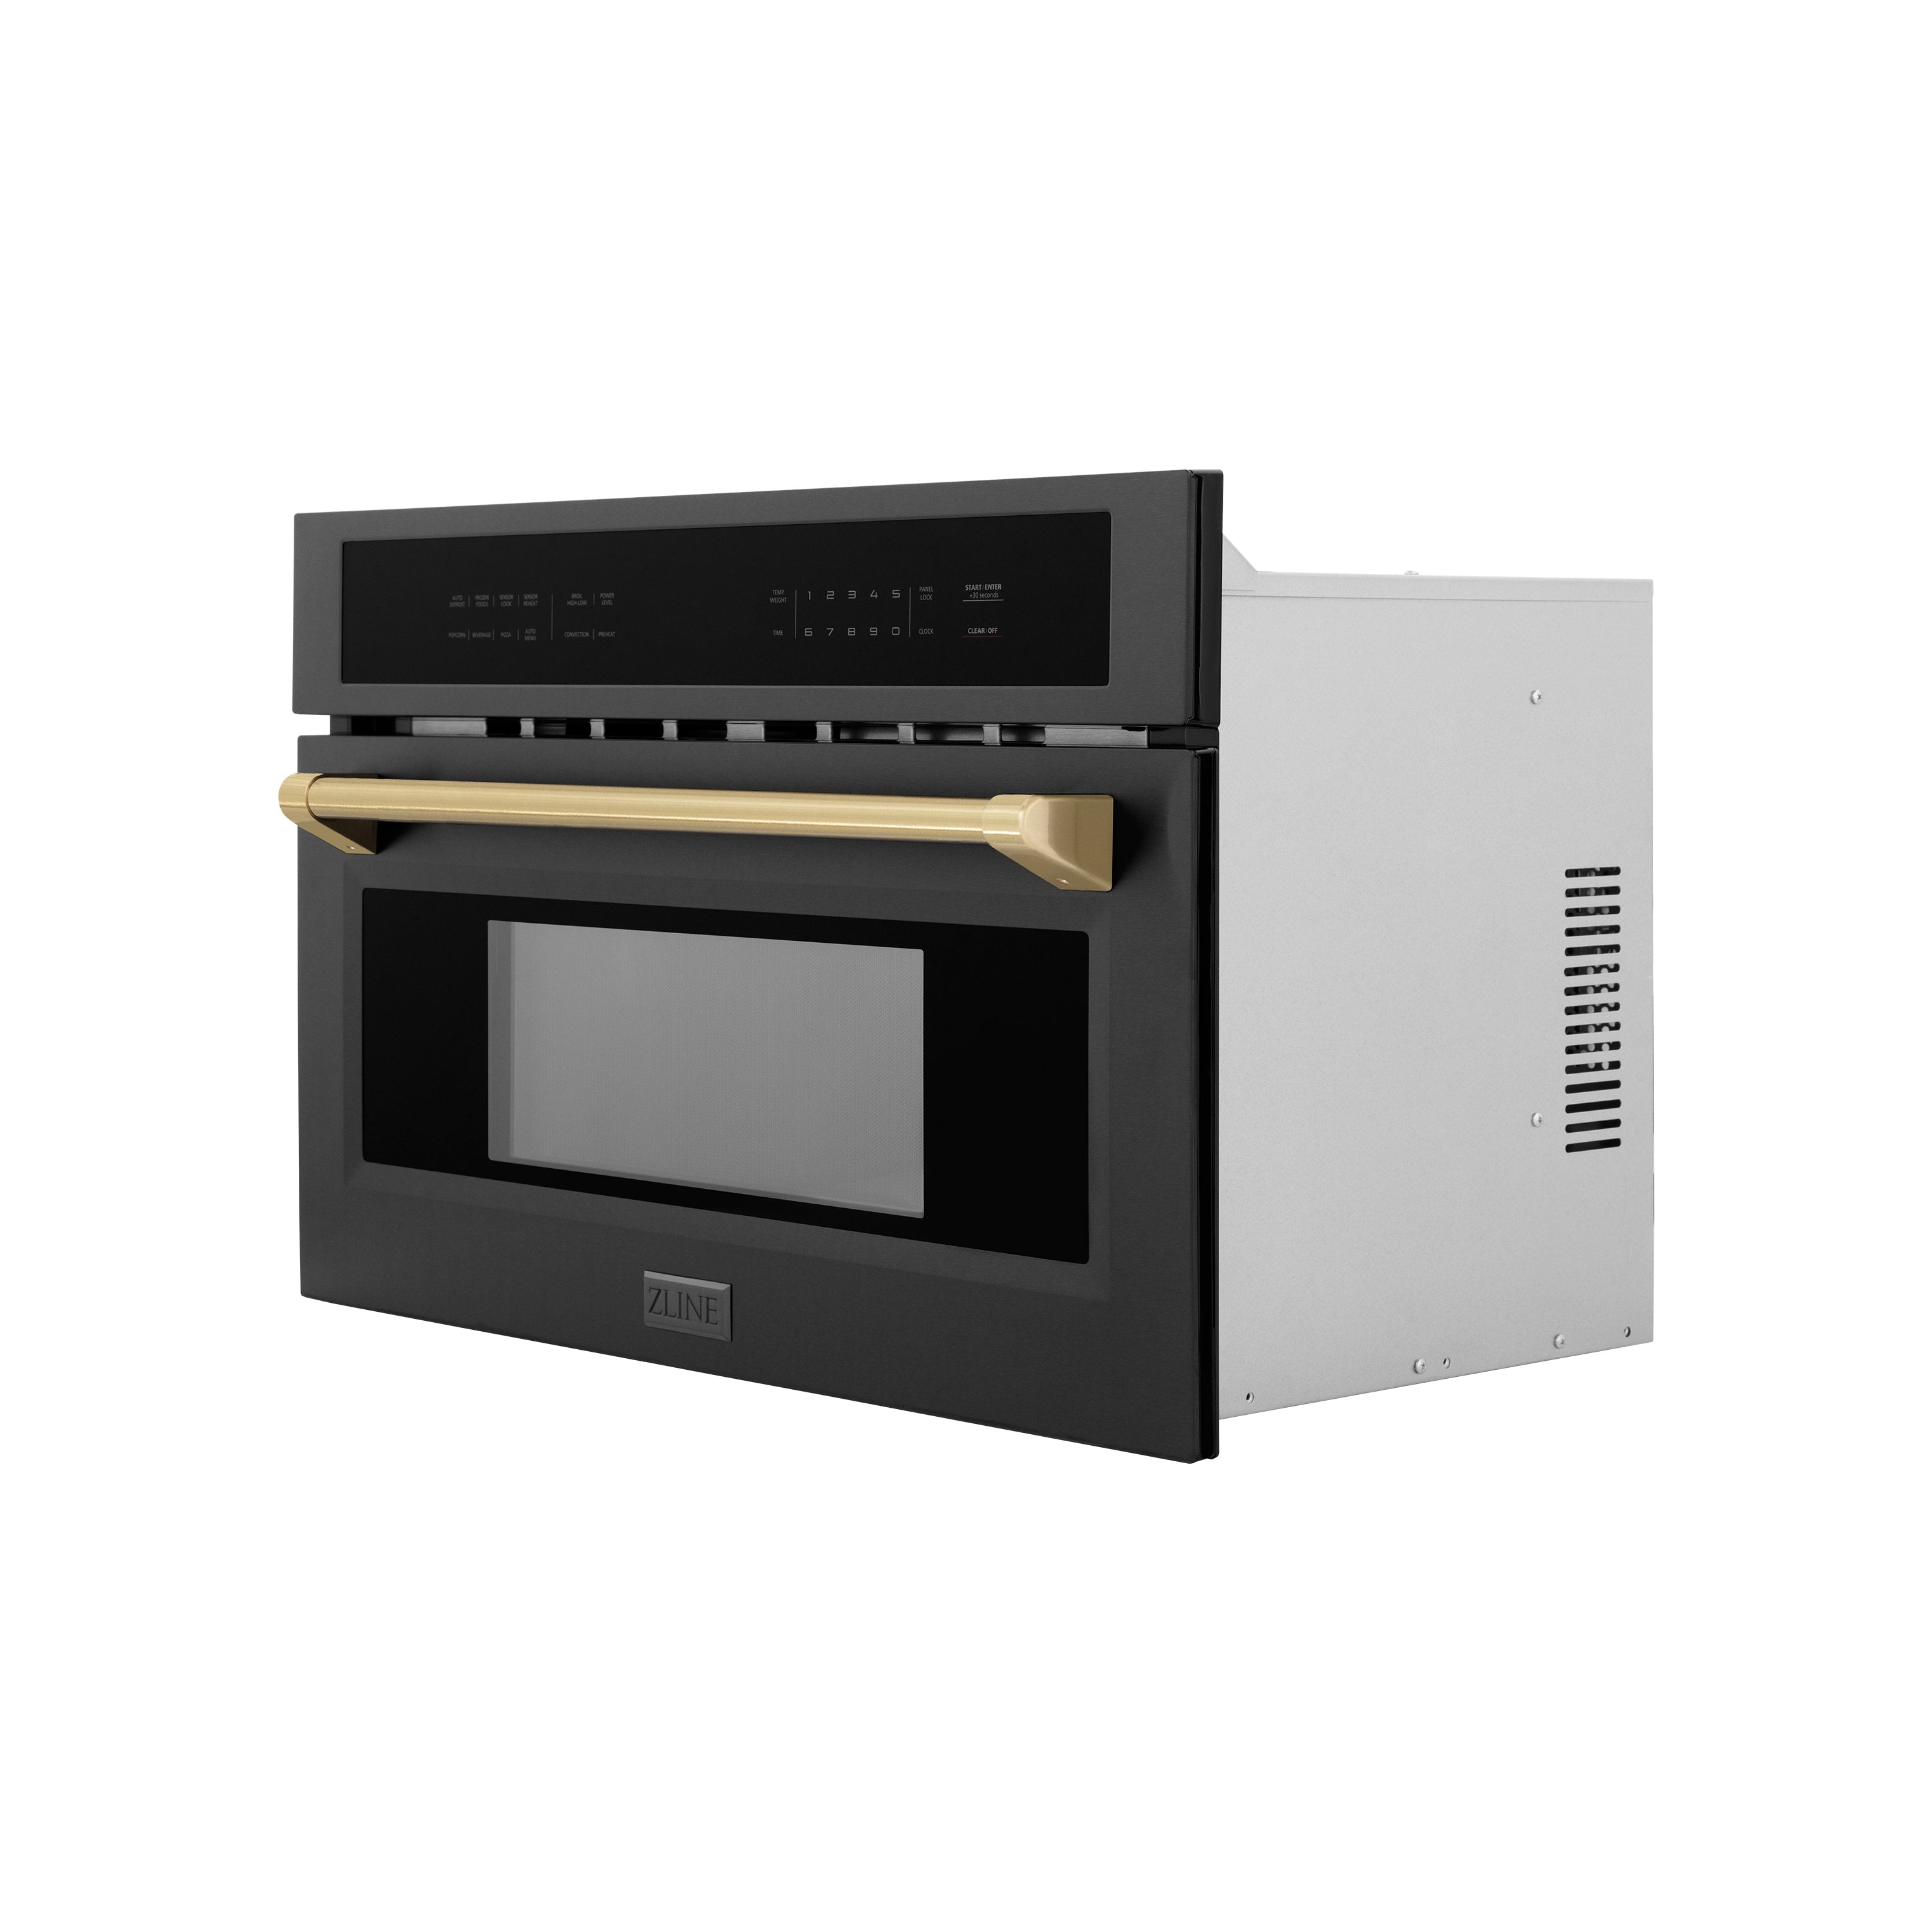 ZLINE Autograph Edition 30 in. 1.6 cu ft. Built-in Convection Microwave Oven in Black Stainless Steel with Champagne Bronze Accents (MWOZ-30-BS-CB) Side View Door Closed